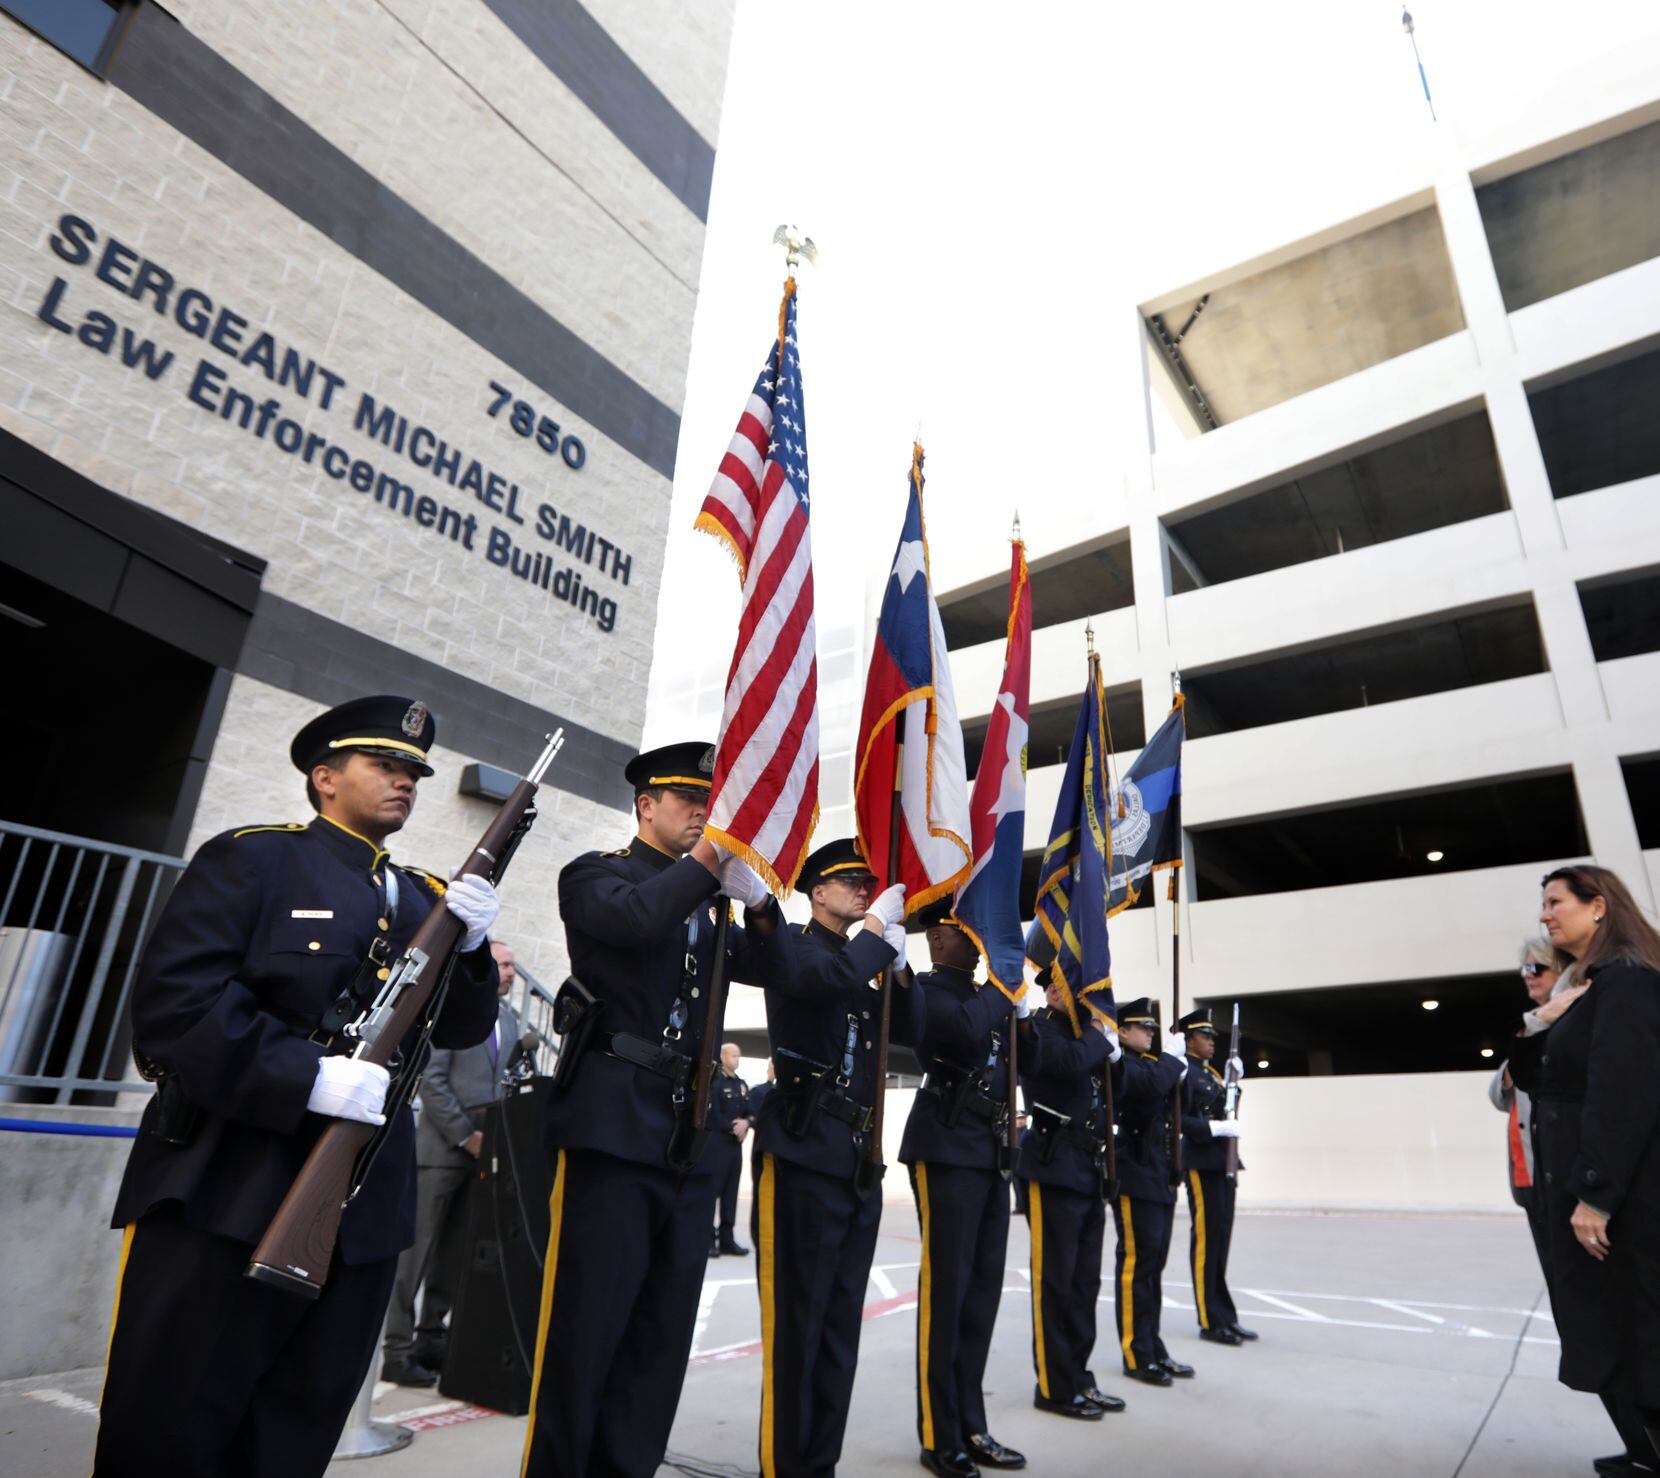 The city of Dallas' Department of Aviation hosted Friday's ceremony at Dallas Love Field.